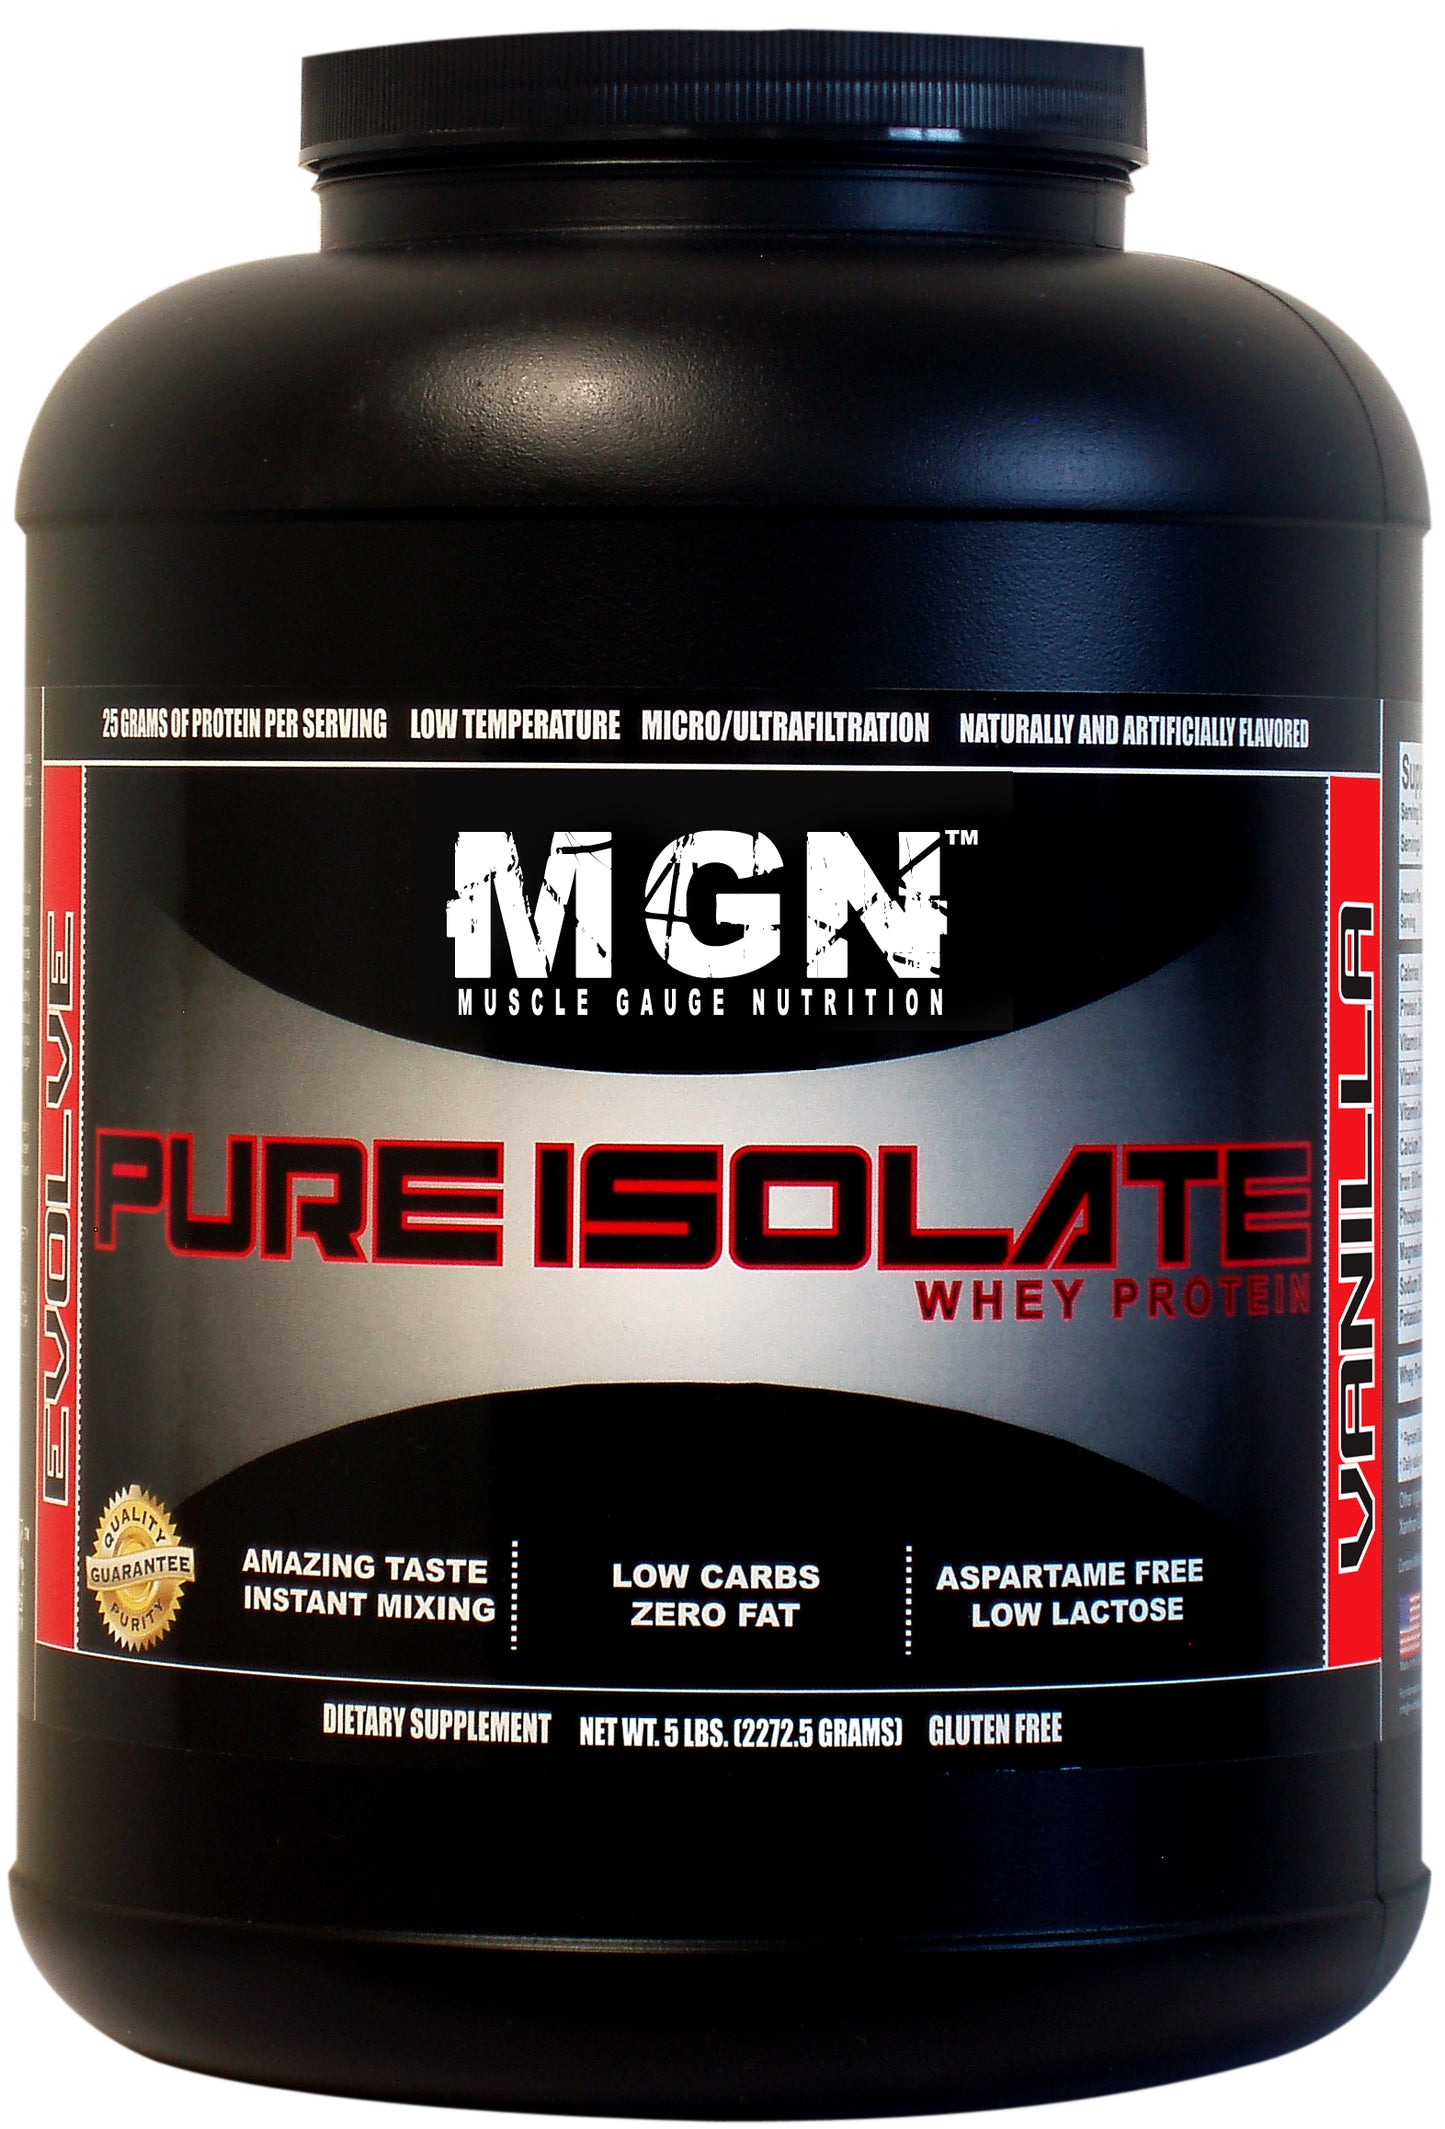 Pure Whey Protein Isolate